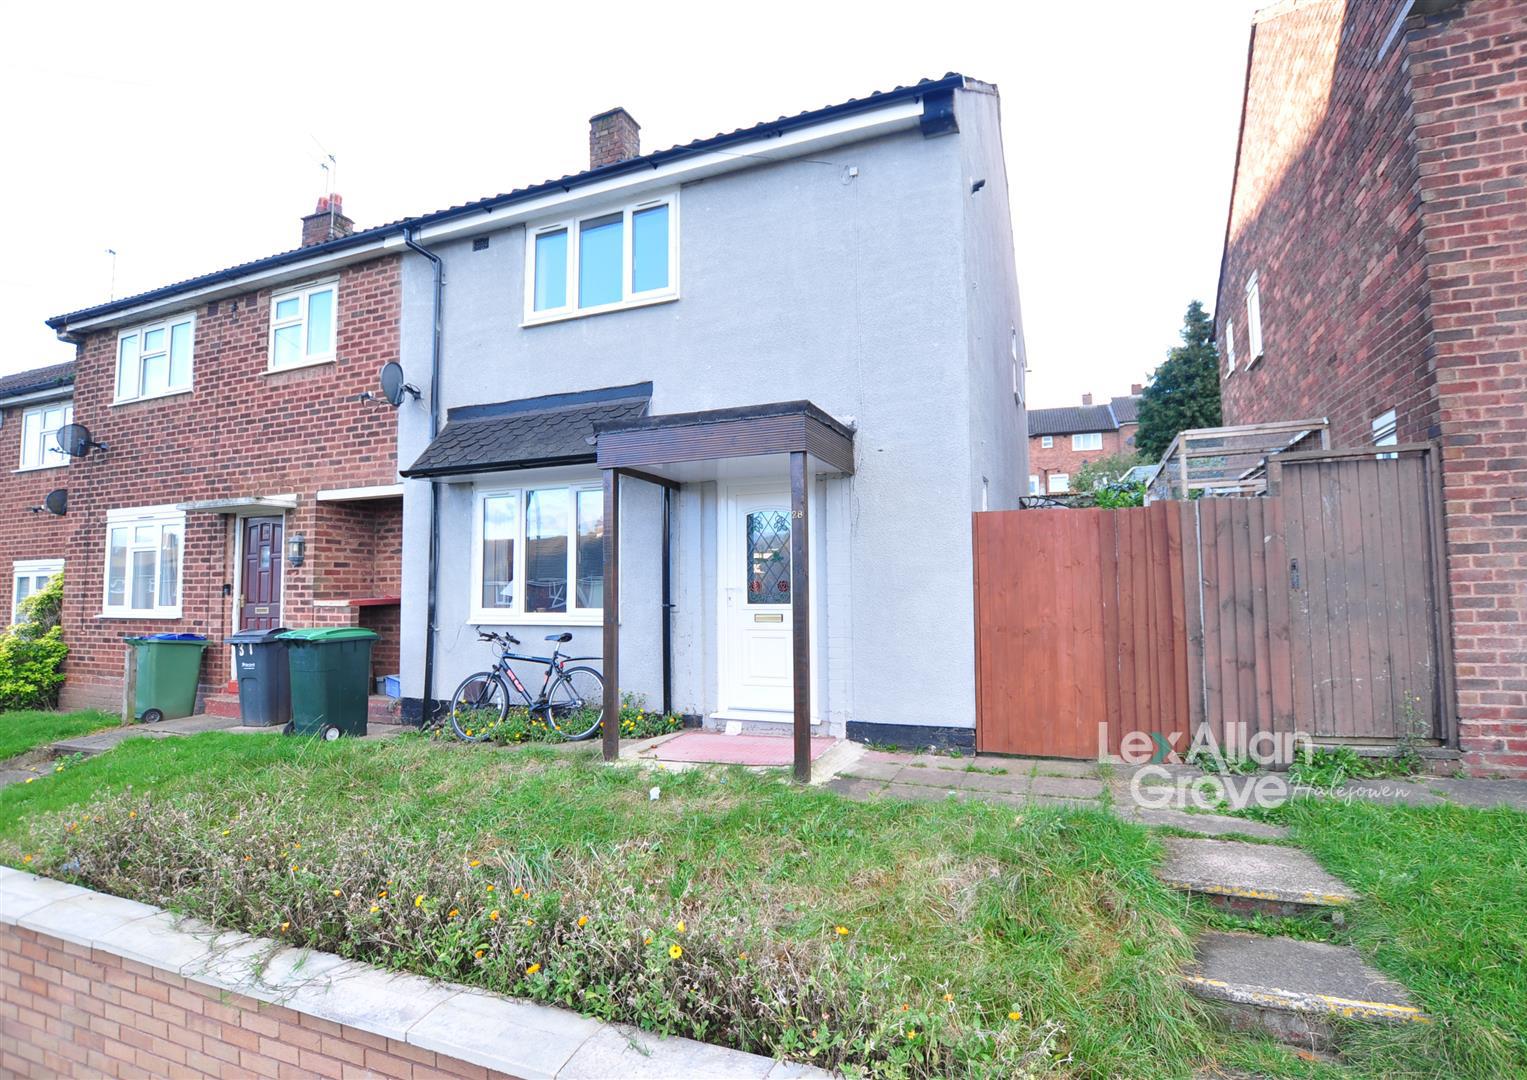 2 bed end of terrace house for sale in Abberley Road, Oldbury, B68 